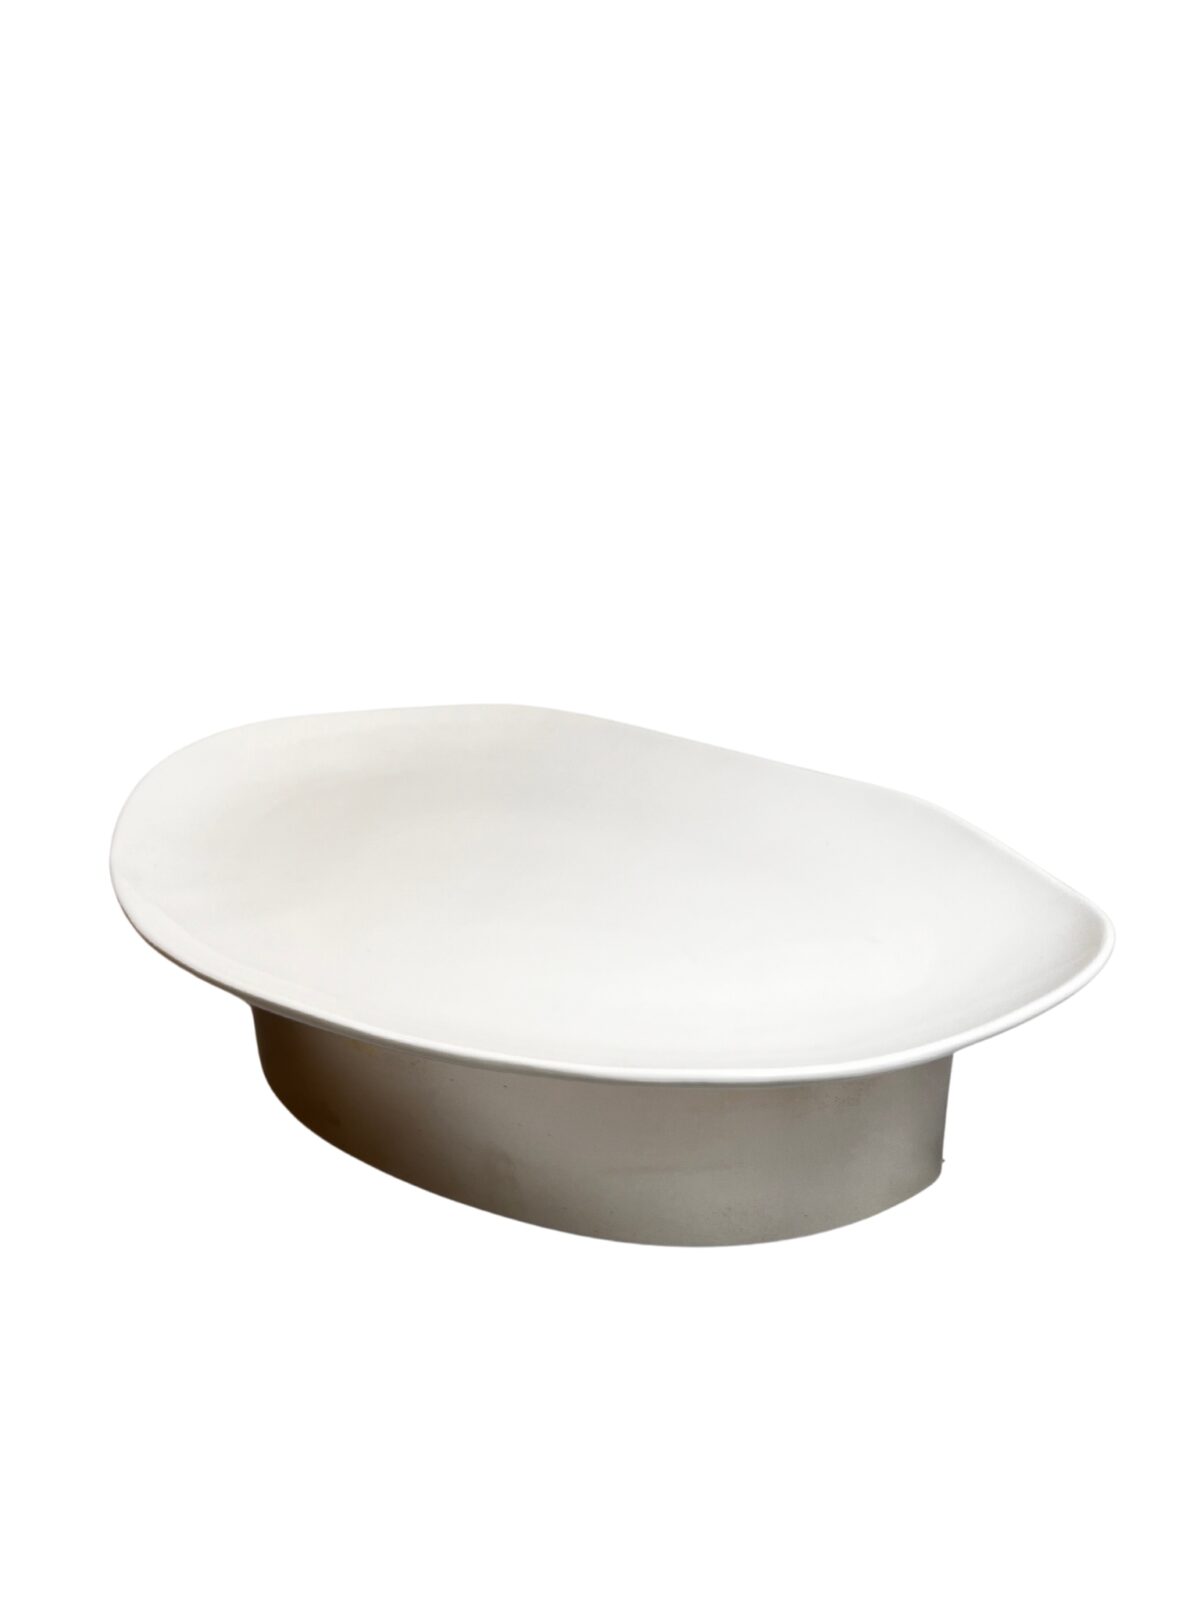 Rabwa Stand with Large Porcelain Plate